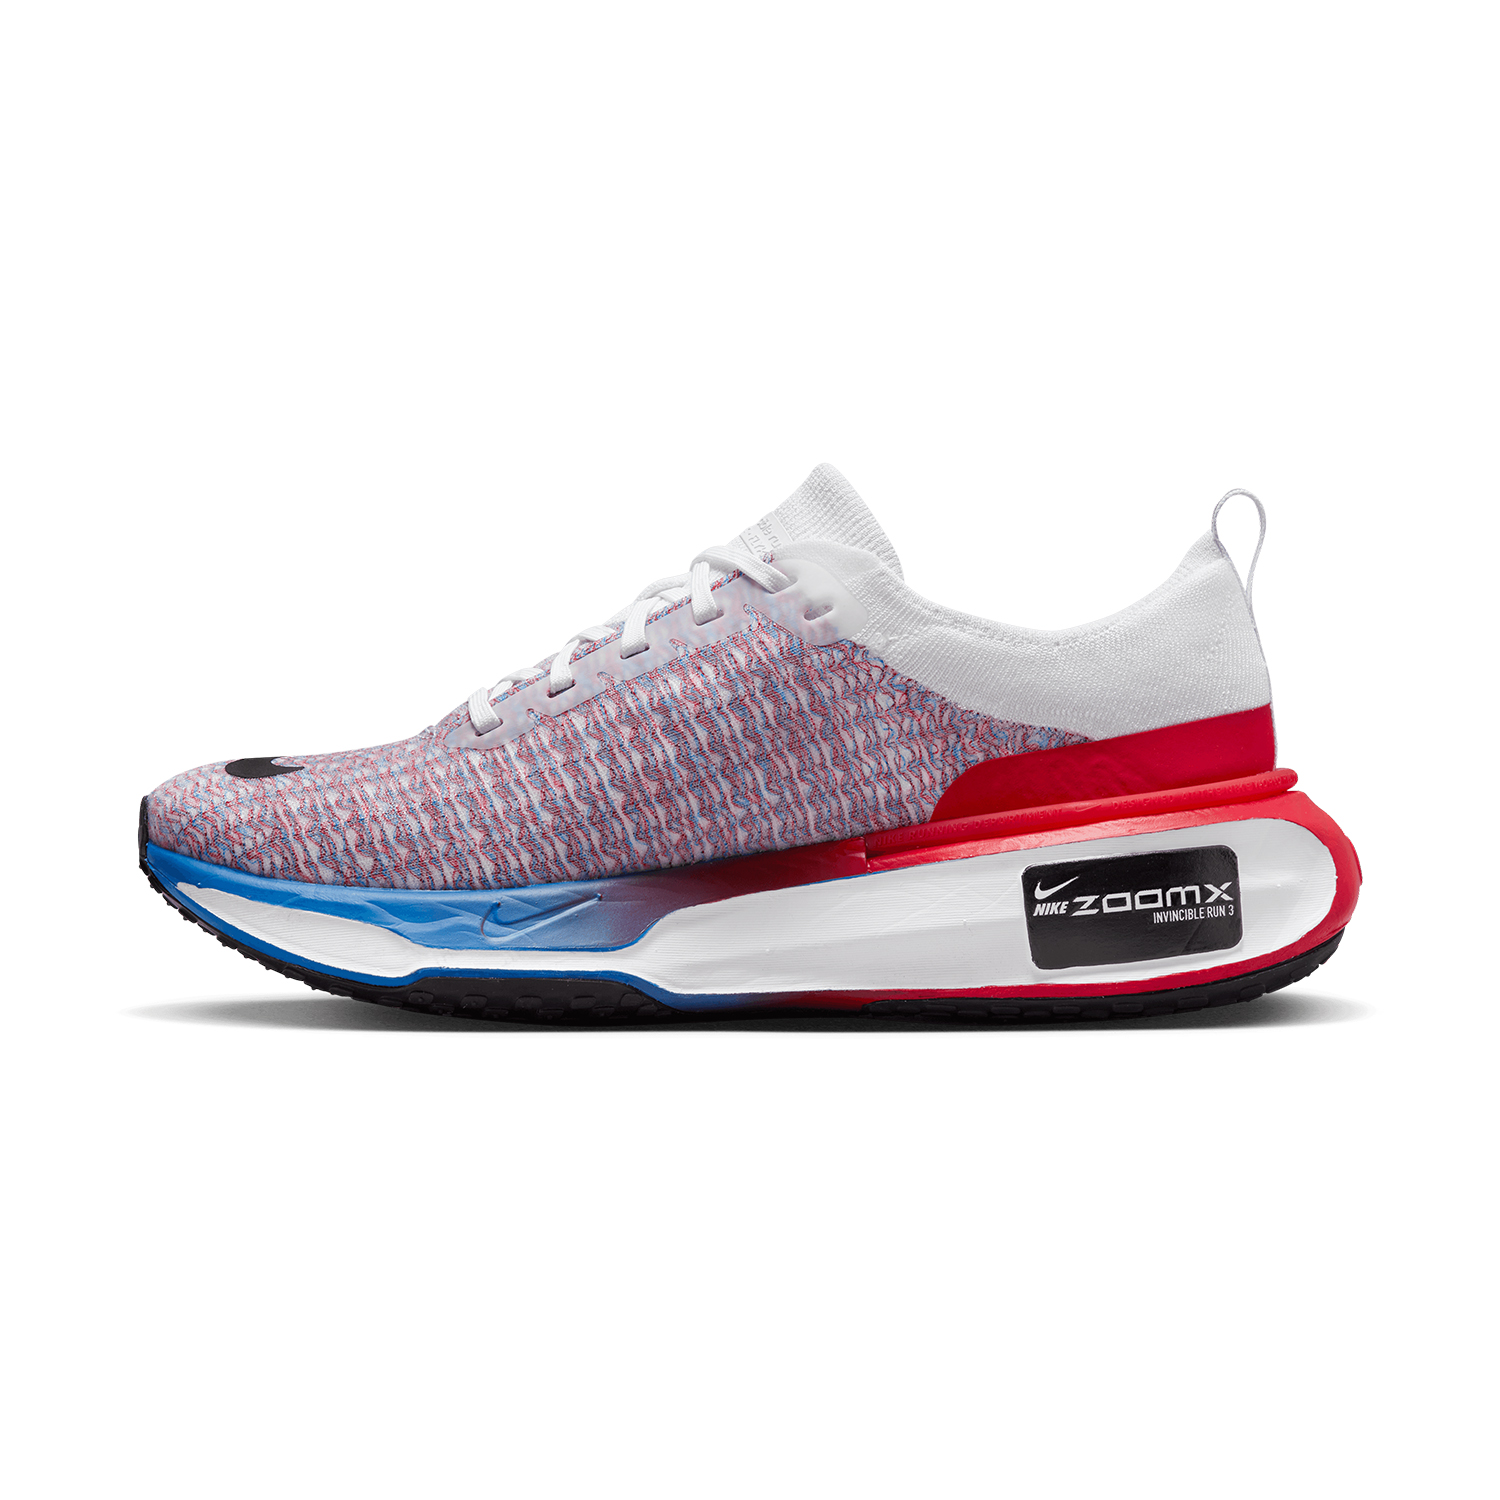 Nike ZoomX Invincible Run Flyknit 3 - White/Black/University Red/Photo Blue